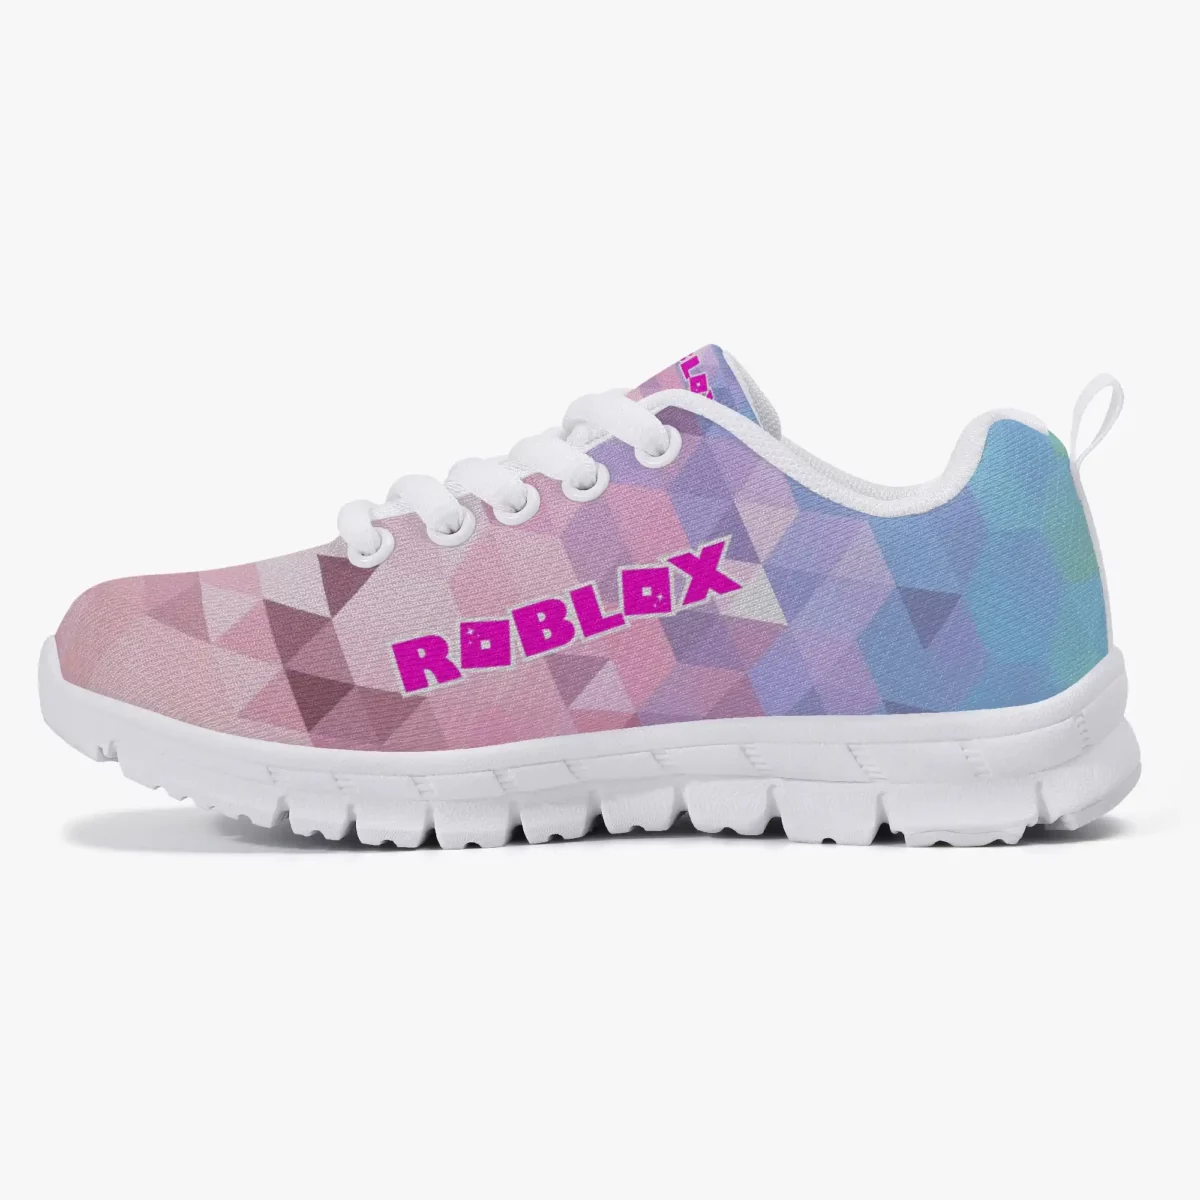 Roblox Girls Personalized Lightweight Mesh Sneakers Inspired by Roblox Girl Video Games Cool Kiddo 12